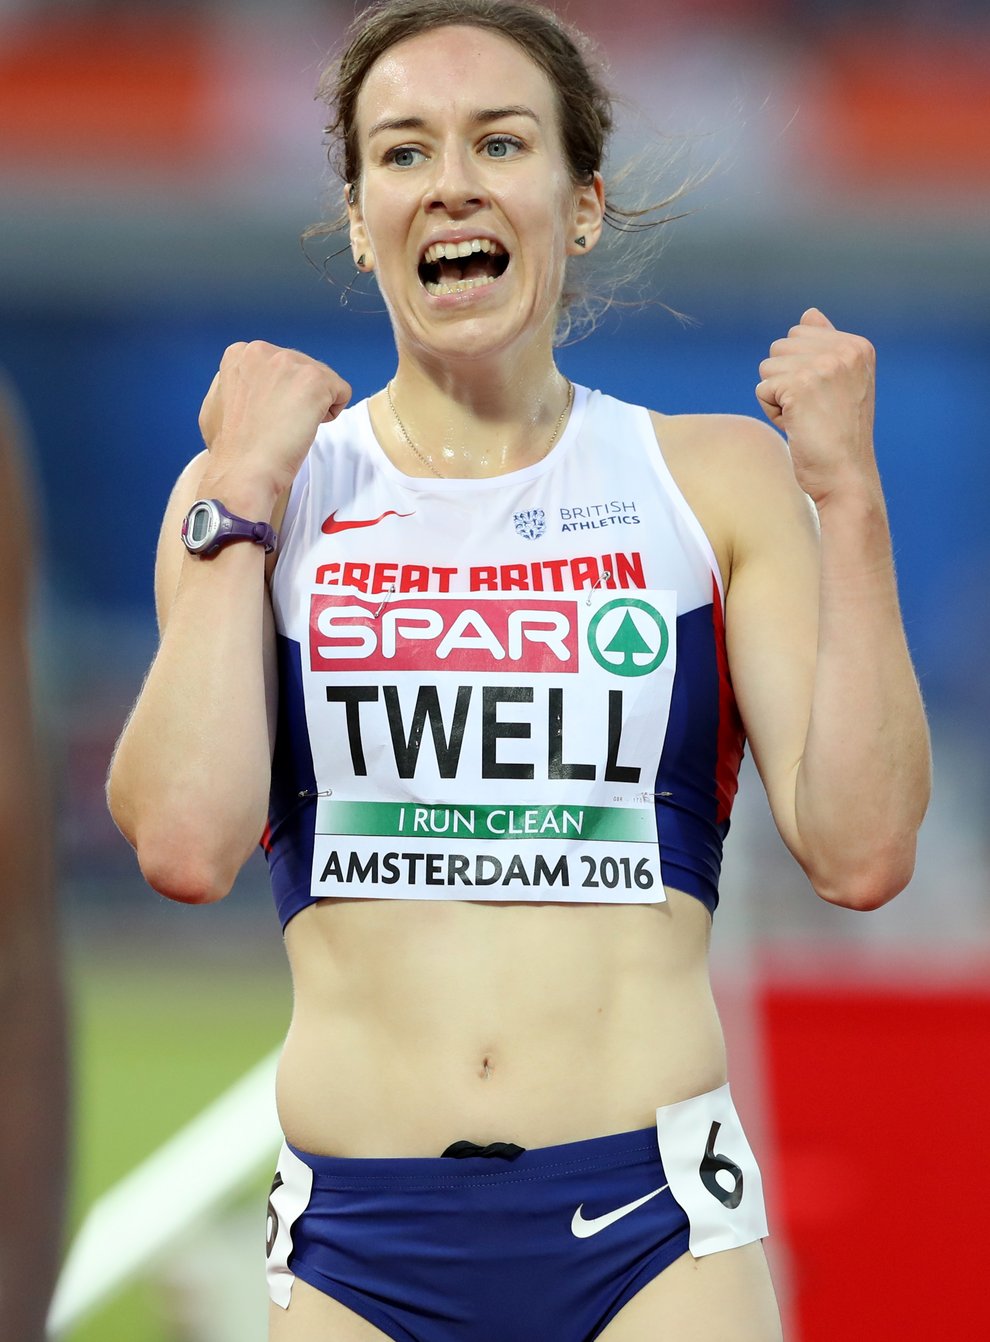 With a personal best of 2:26:40 from last year, Steph Twell is one of a handful of British female athletes to have gone inside the Olympic qualifying standard of 2:29:30.